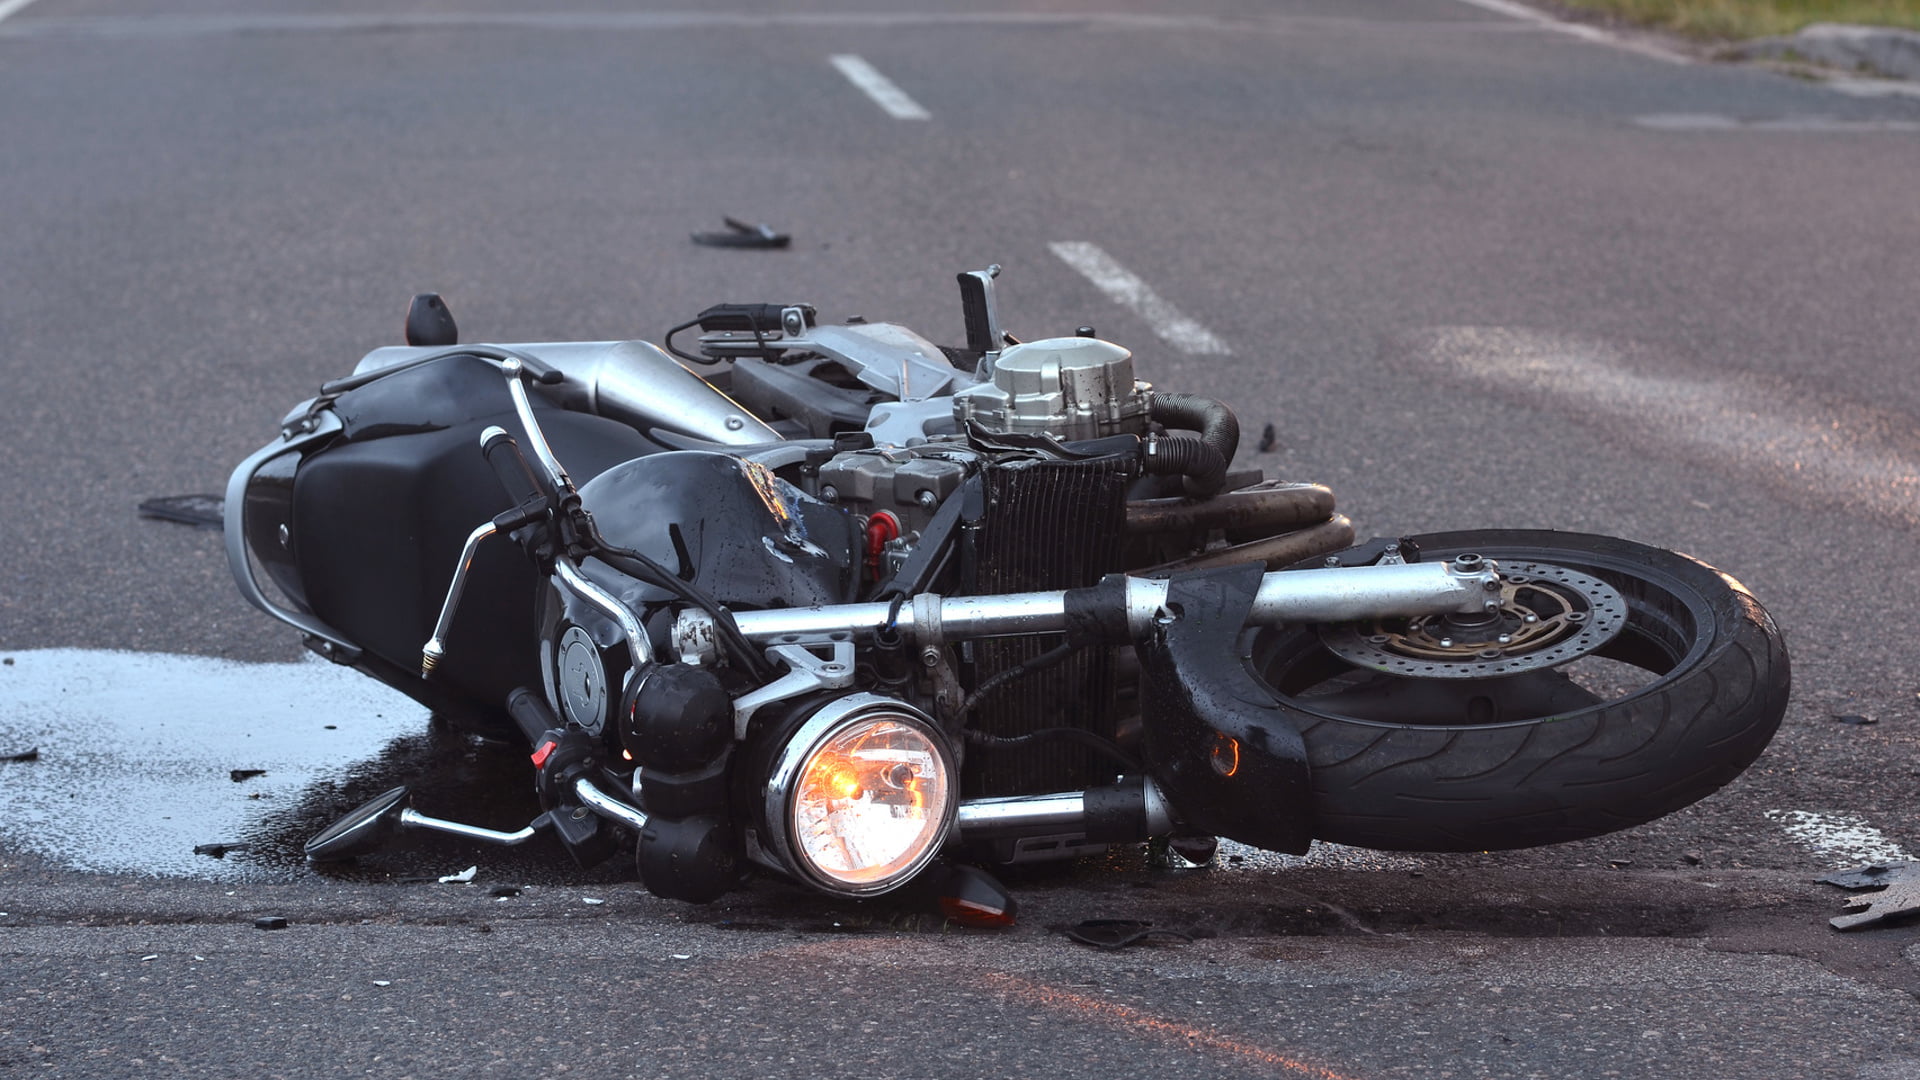 5 Common Motorcycle Accident Causes